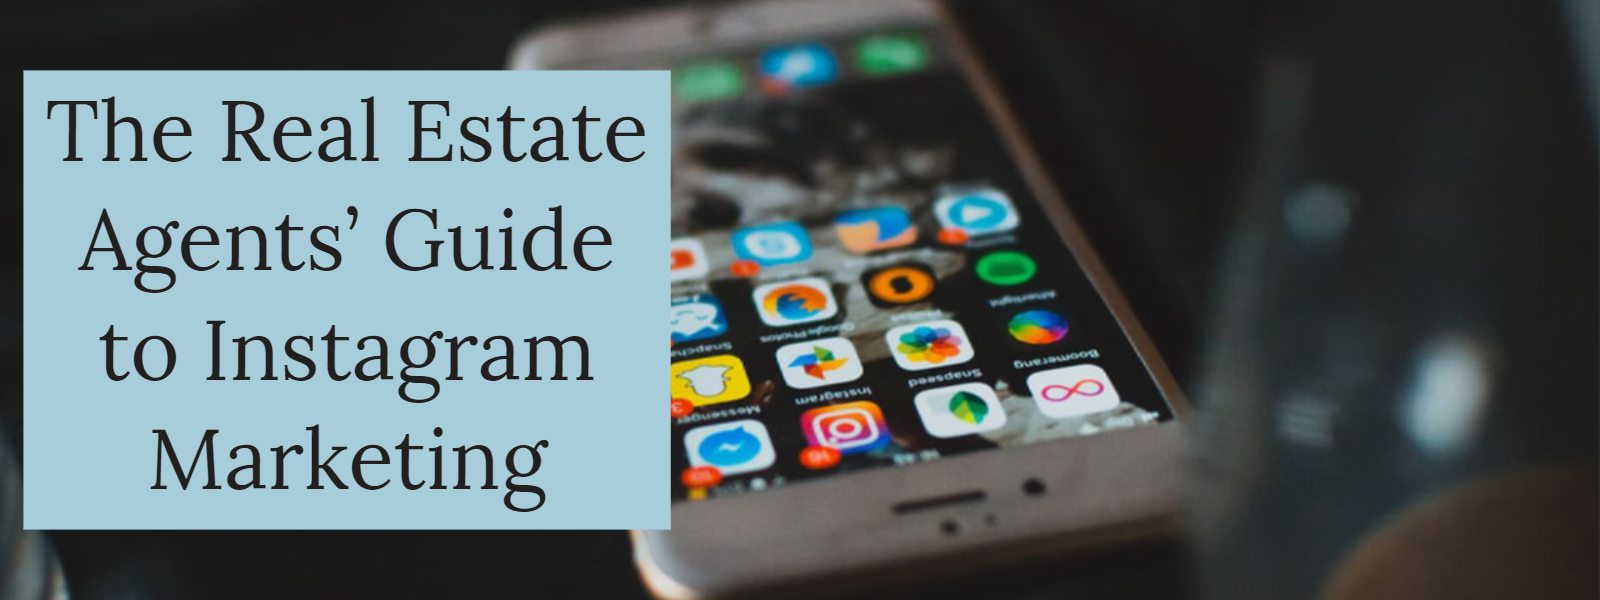 The Real Estate Agents’ Guide to Instagram Marketing